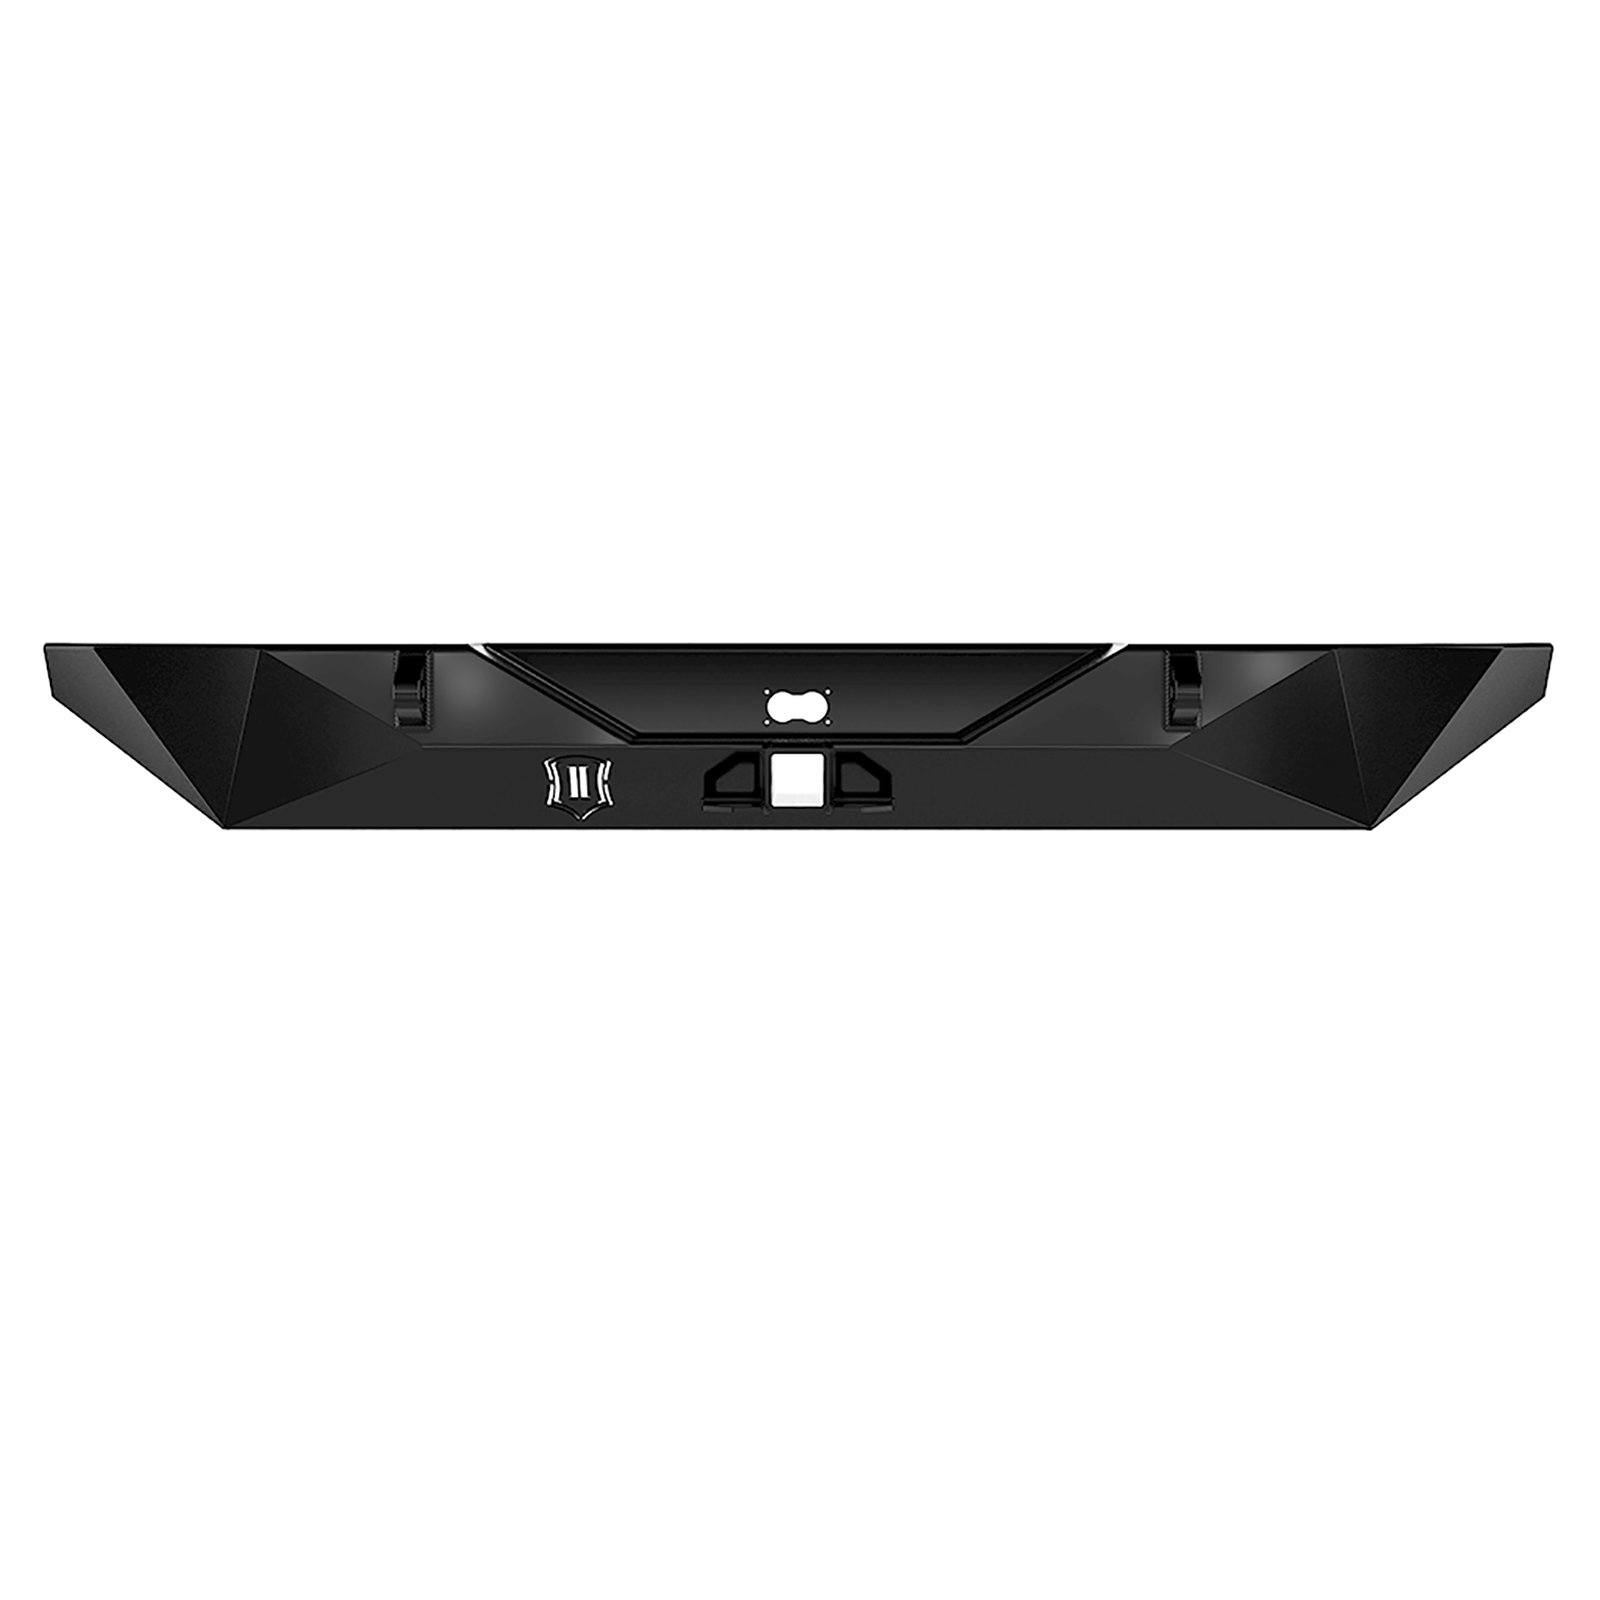 '07-18 Jeep JK Pro Series Rear Bumper W/ Hitch & Tabs Impact Series Off-Road Armor (front view)